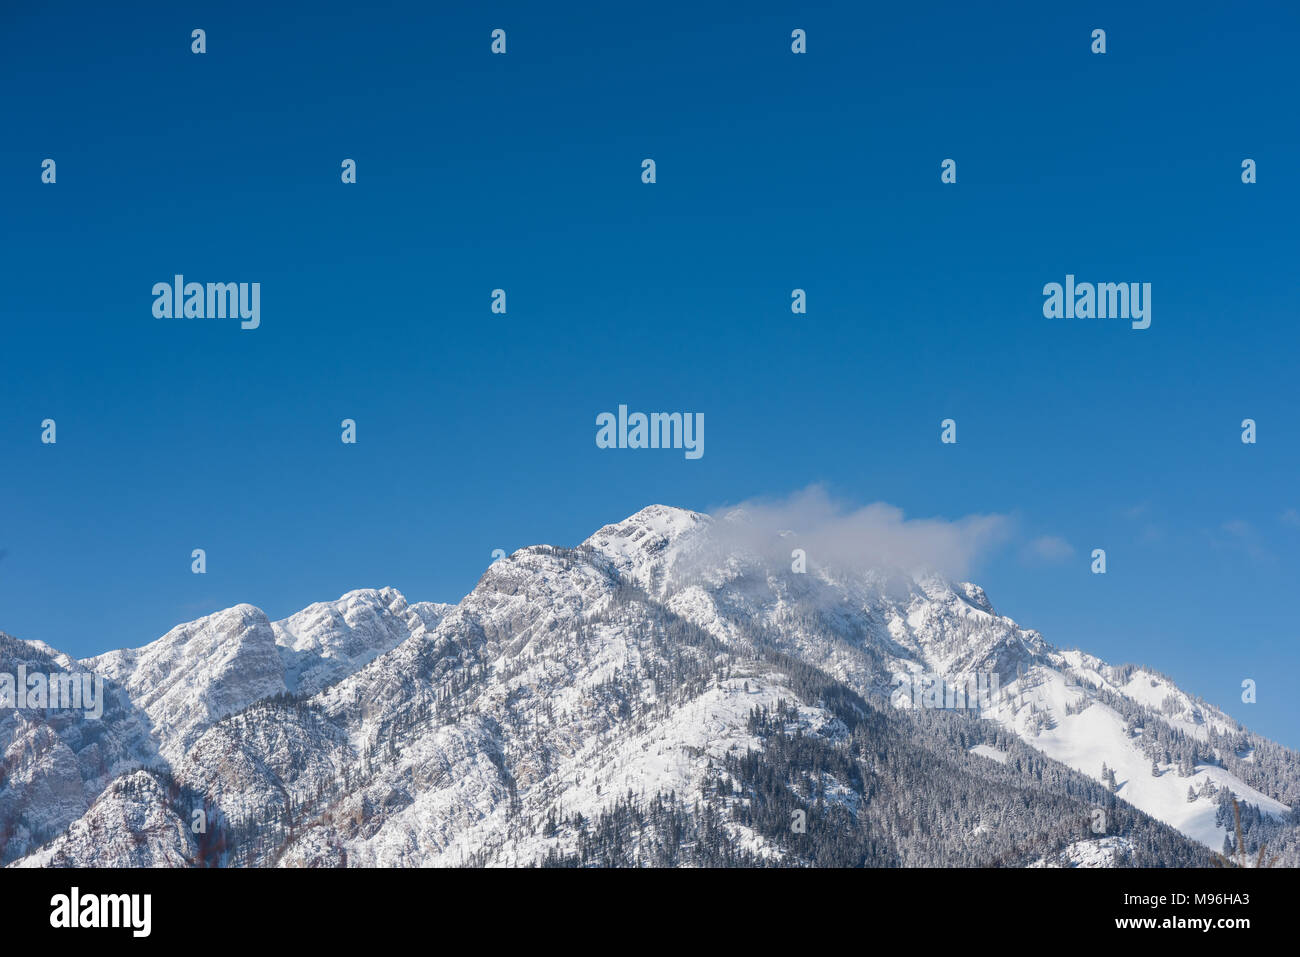 Snow capped mountains during winter Stock Photo